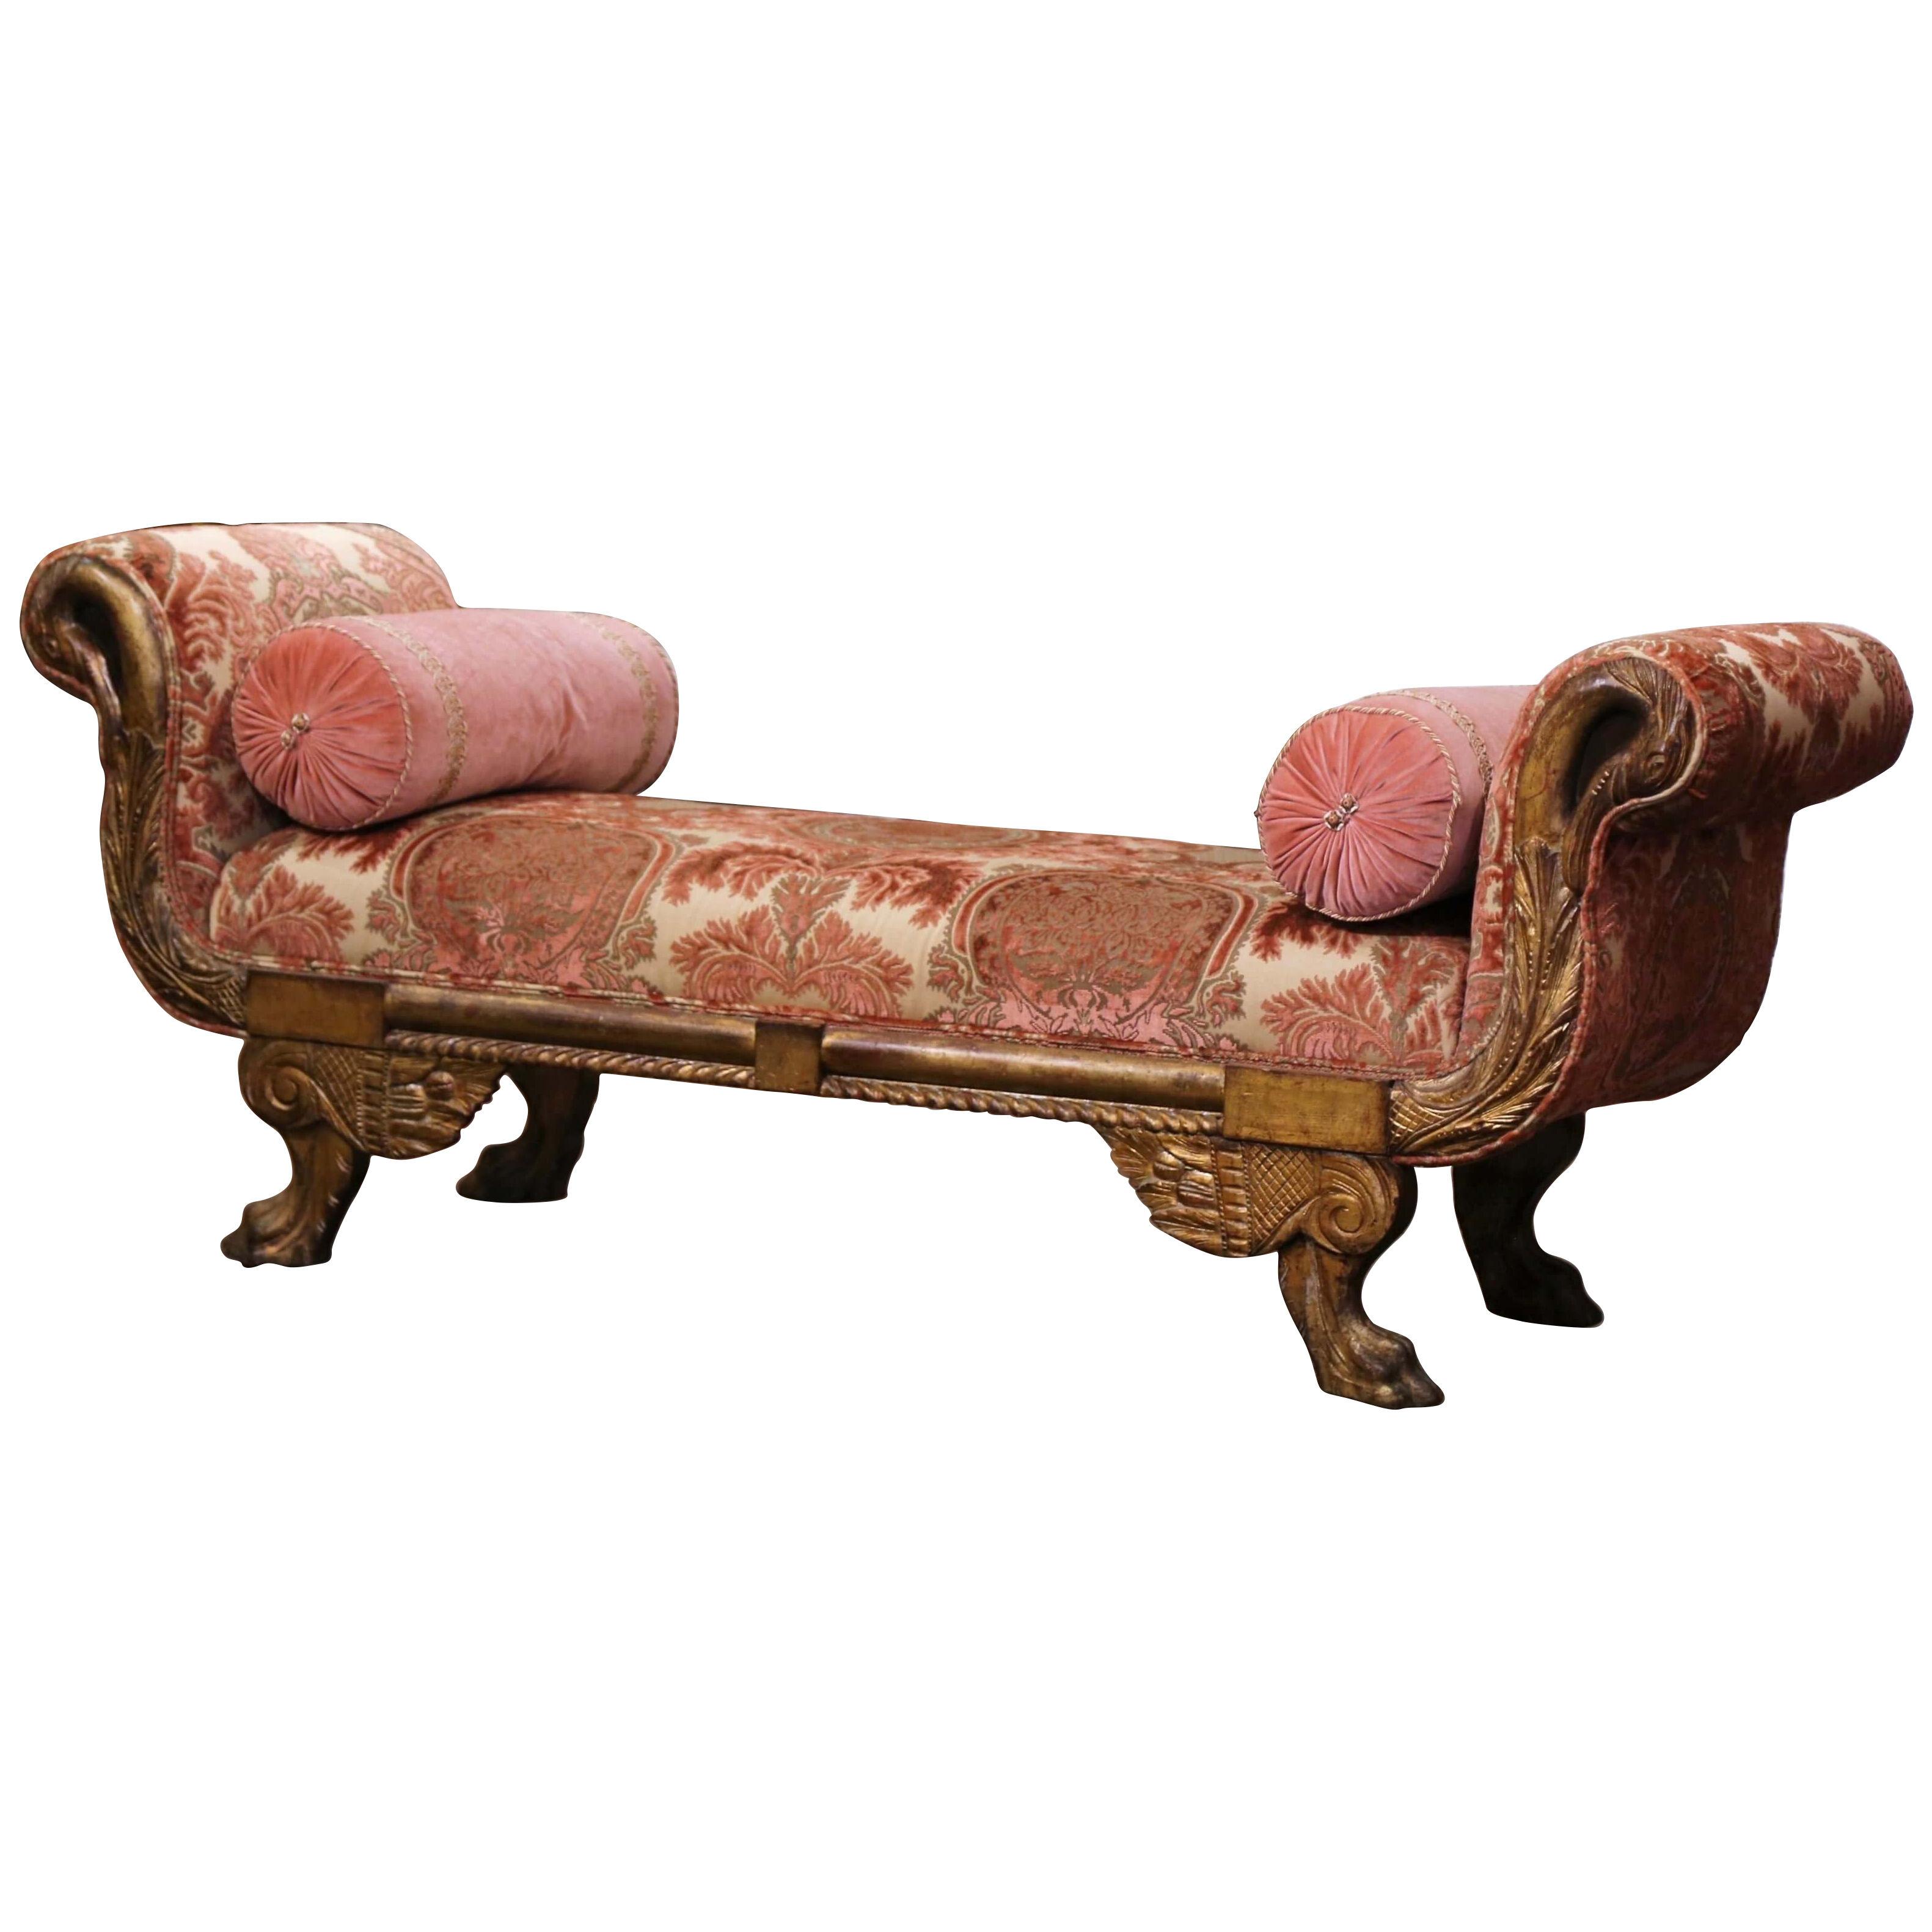 19th Century Italian Carved Gilt Wood and Velvet Daybed with Swan Motifs